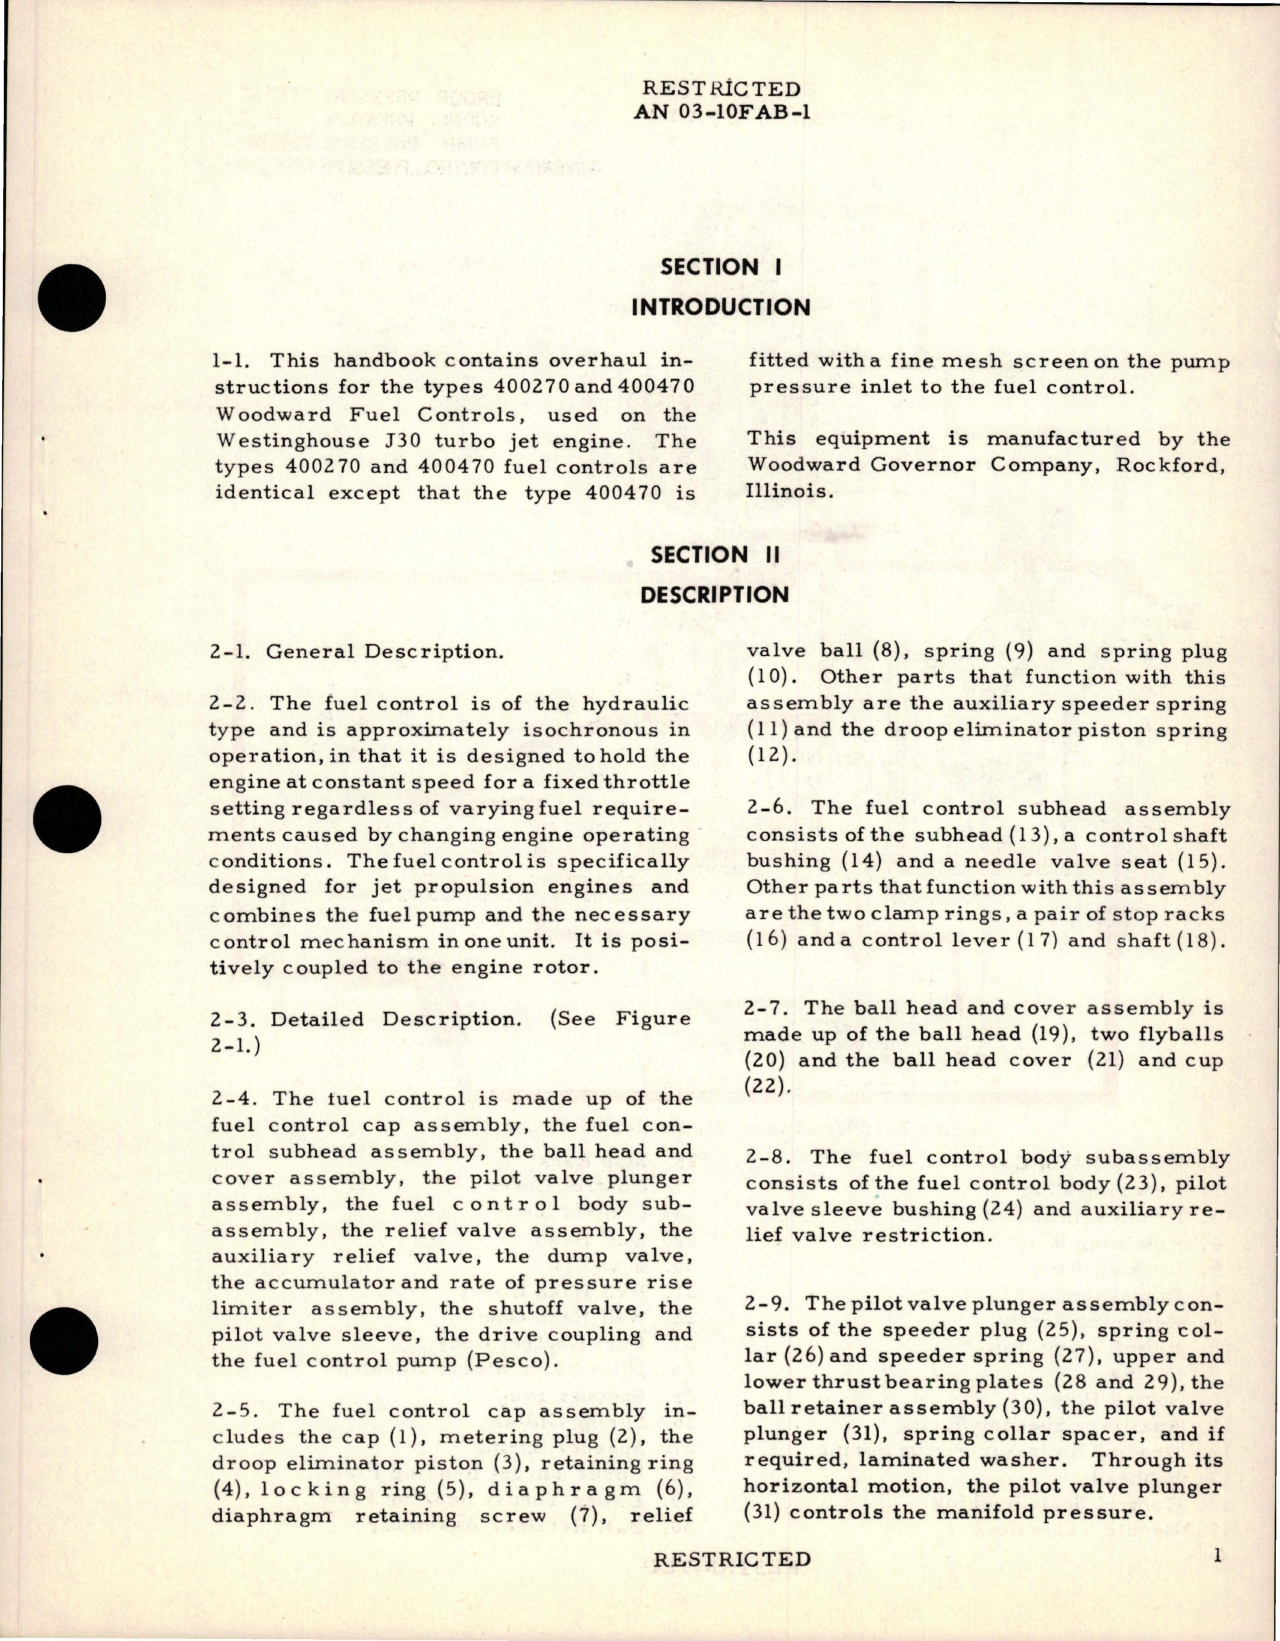 Sample page 5 from AirCorps Library document: Overhaul Instructions for Fuel Control - Models 400270 and 400470